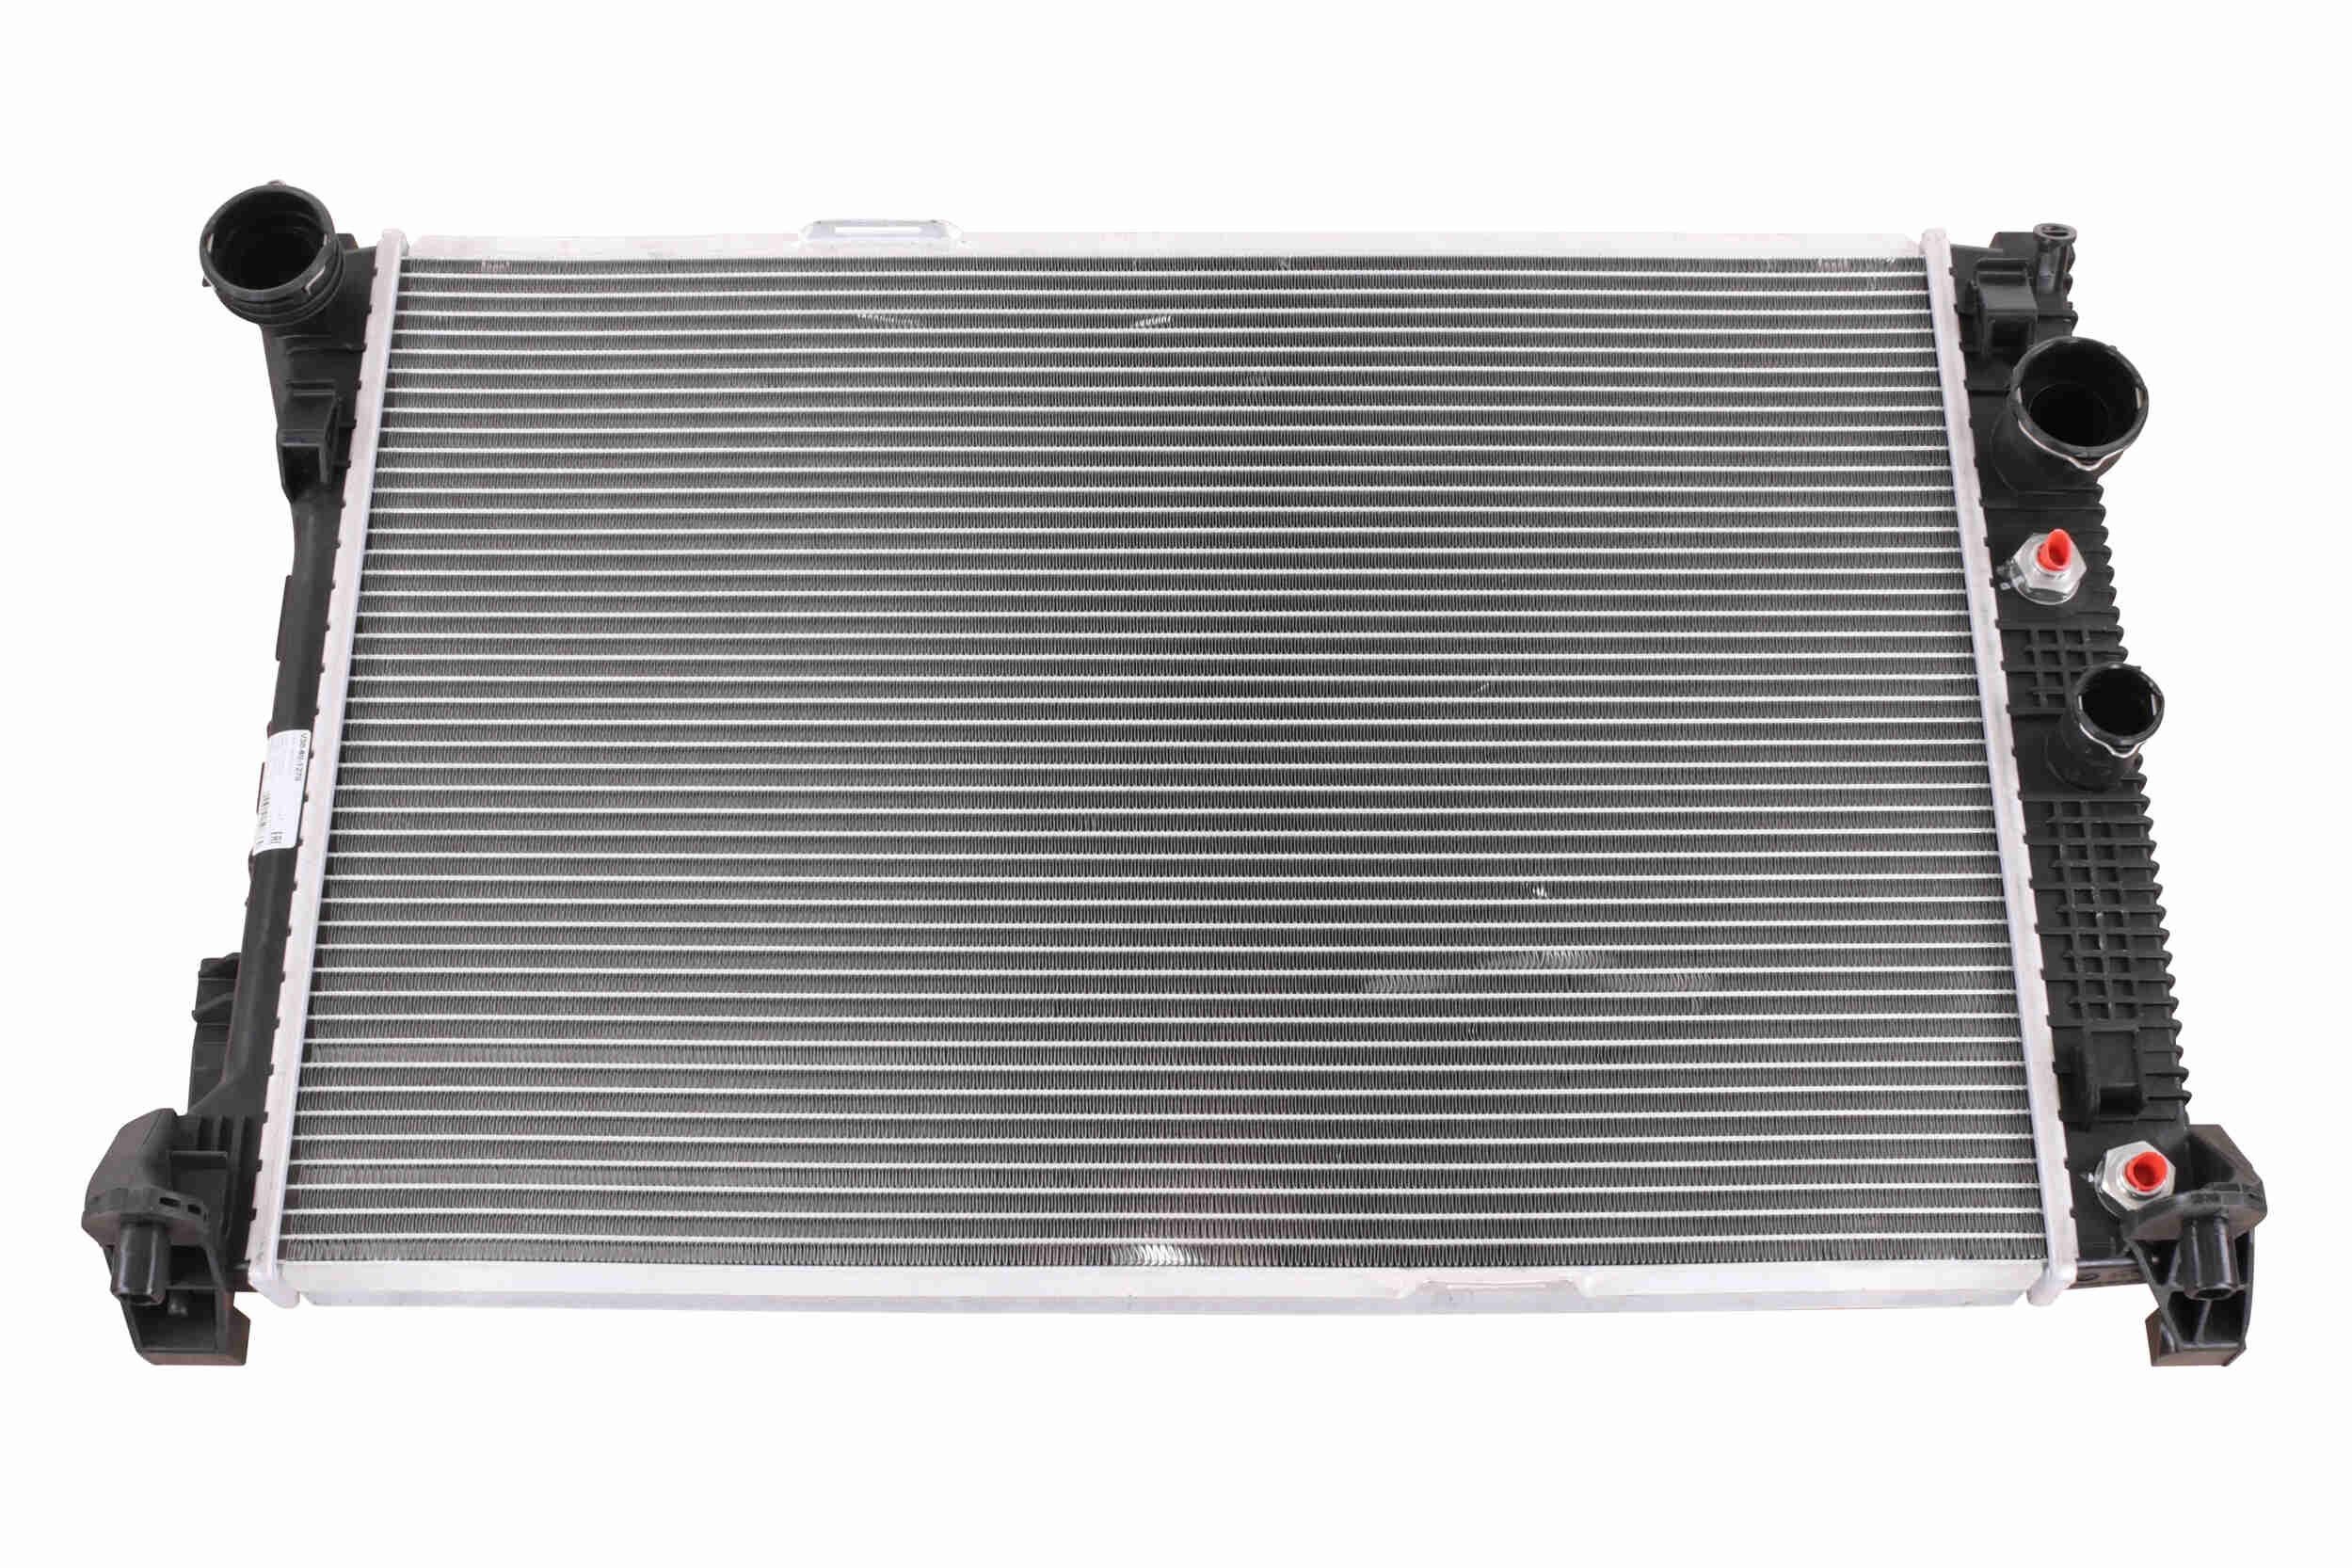 Engine radiator VEMO for vehicles with air conditioning, 642 x 439 x 27 mm - V30-60-1270